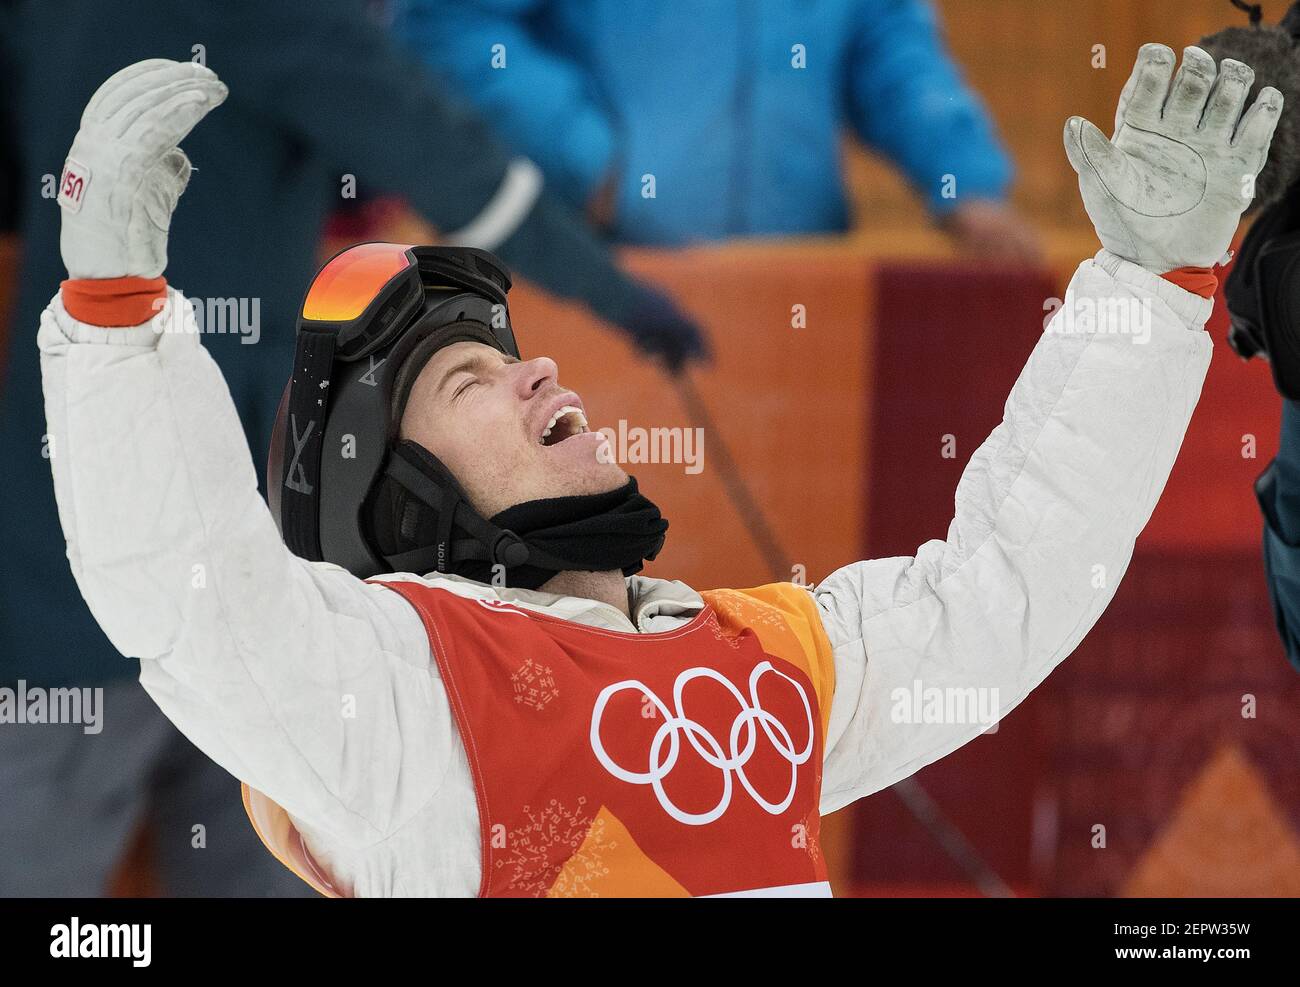 Shaun White of the USA celebrates after his final run during the Men's Half Pipe Snowboard finals at Phoenix Park in South Korea on Wednesday, Feb. 14, 2018, 2018, during the Pyeongchang Winter Olympics. (Photo by Carlos Gonzalez/Minneapolis Star Tribune/TNS/Sipa USA) Stock Photo